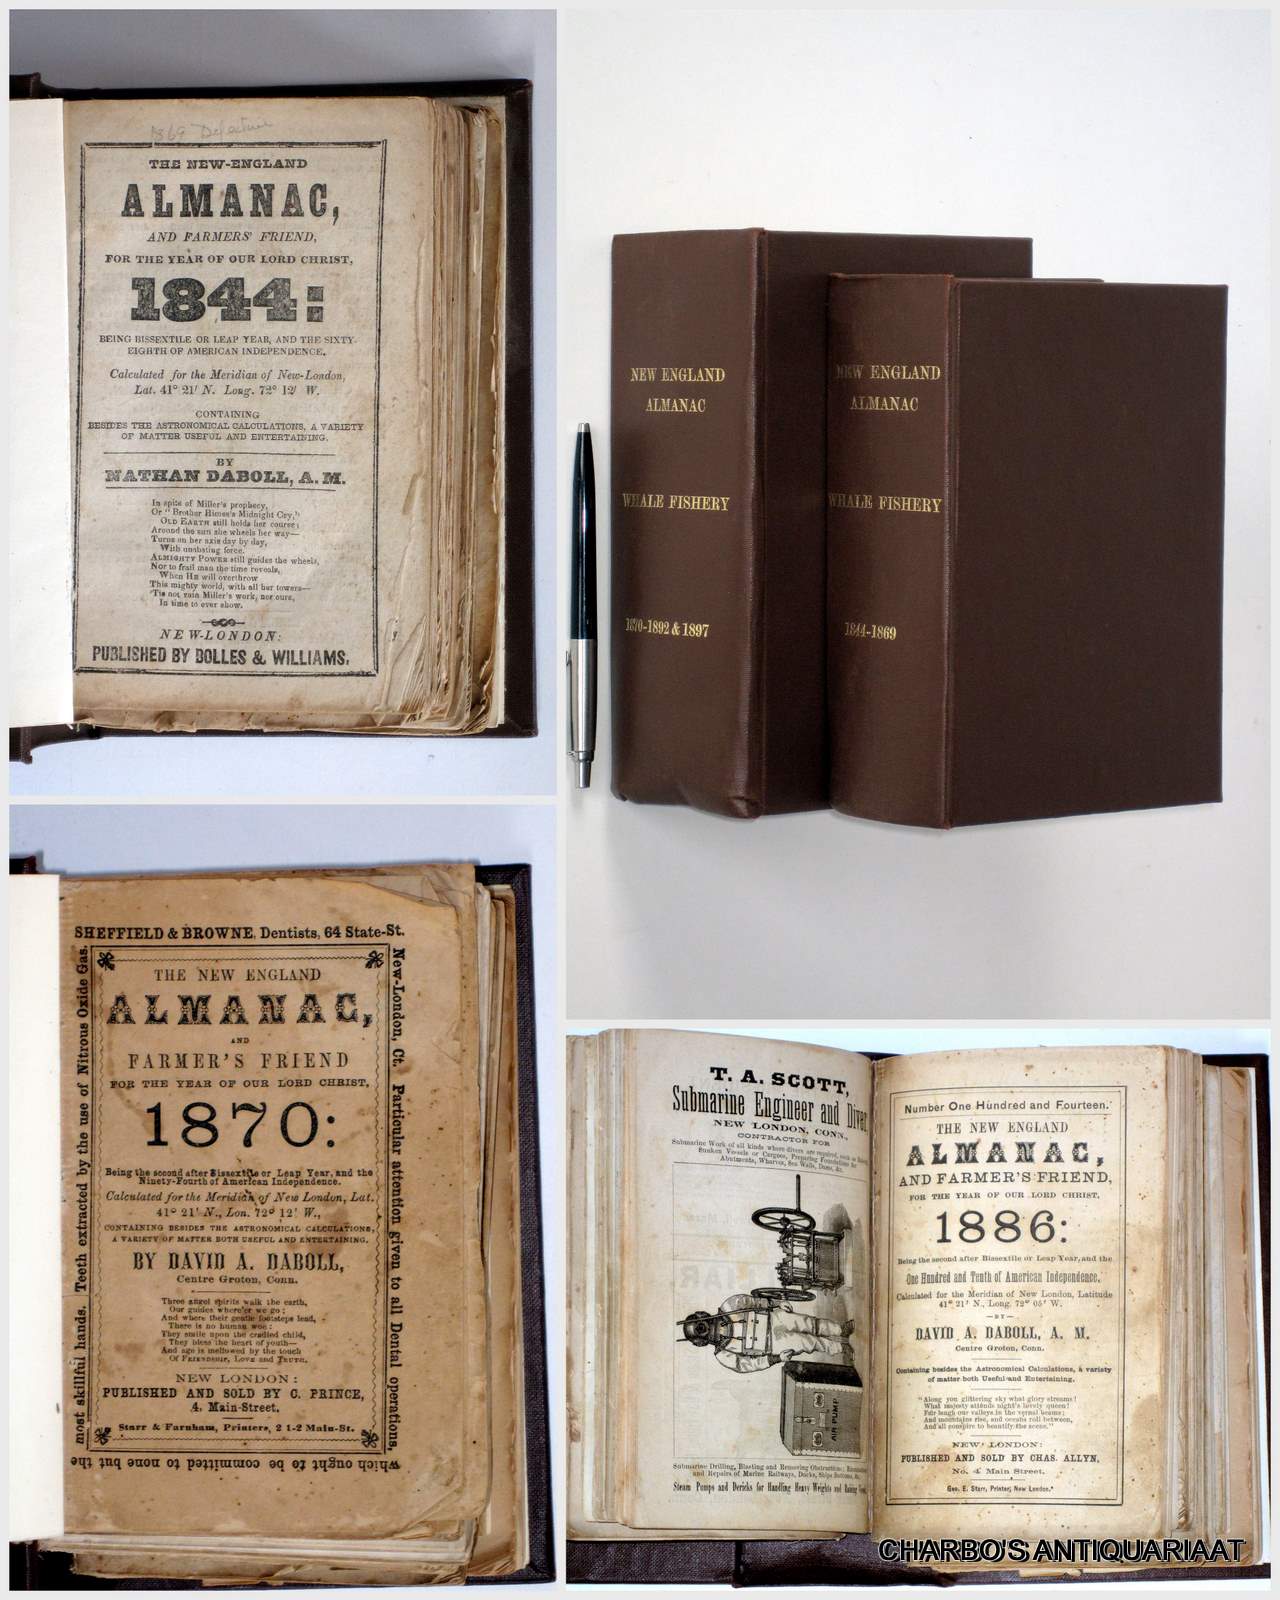 DABOLL, NATHAN & DABOLL, DAVID A., -  The New England Almanac and Farmer's Friend for the year of Our Lord Christ 1844 - 1869 & 1870 - 1892 & 1898, bound in two cloth bindings.